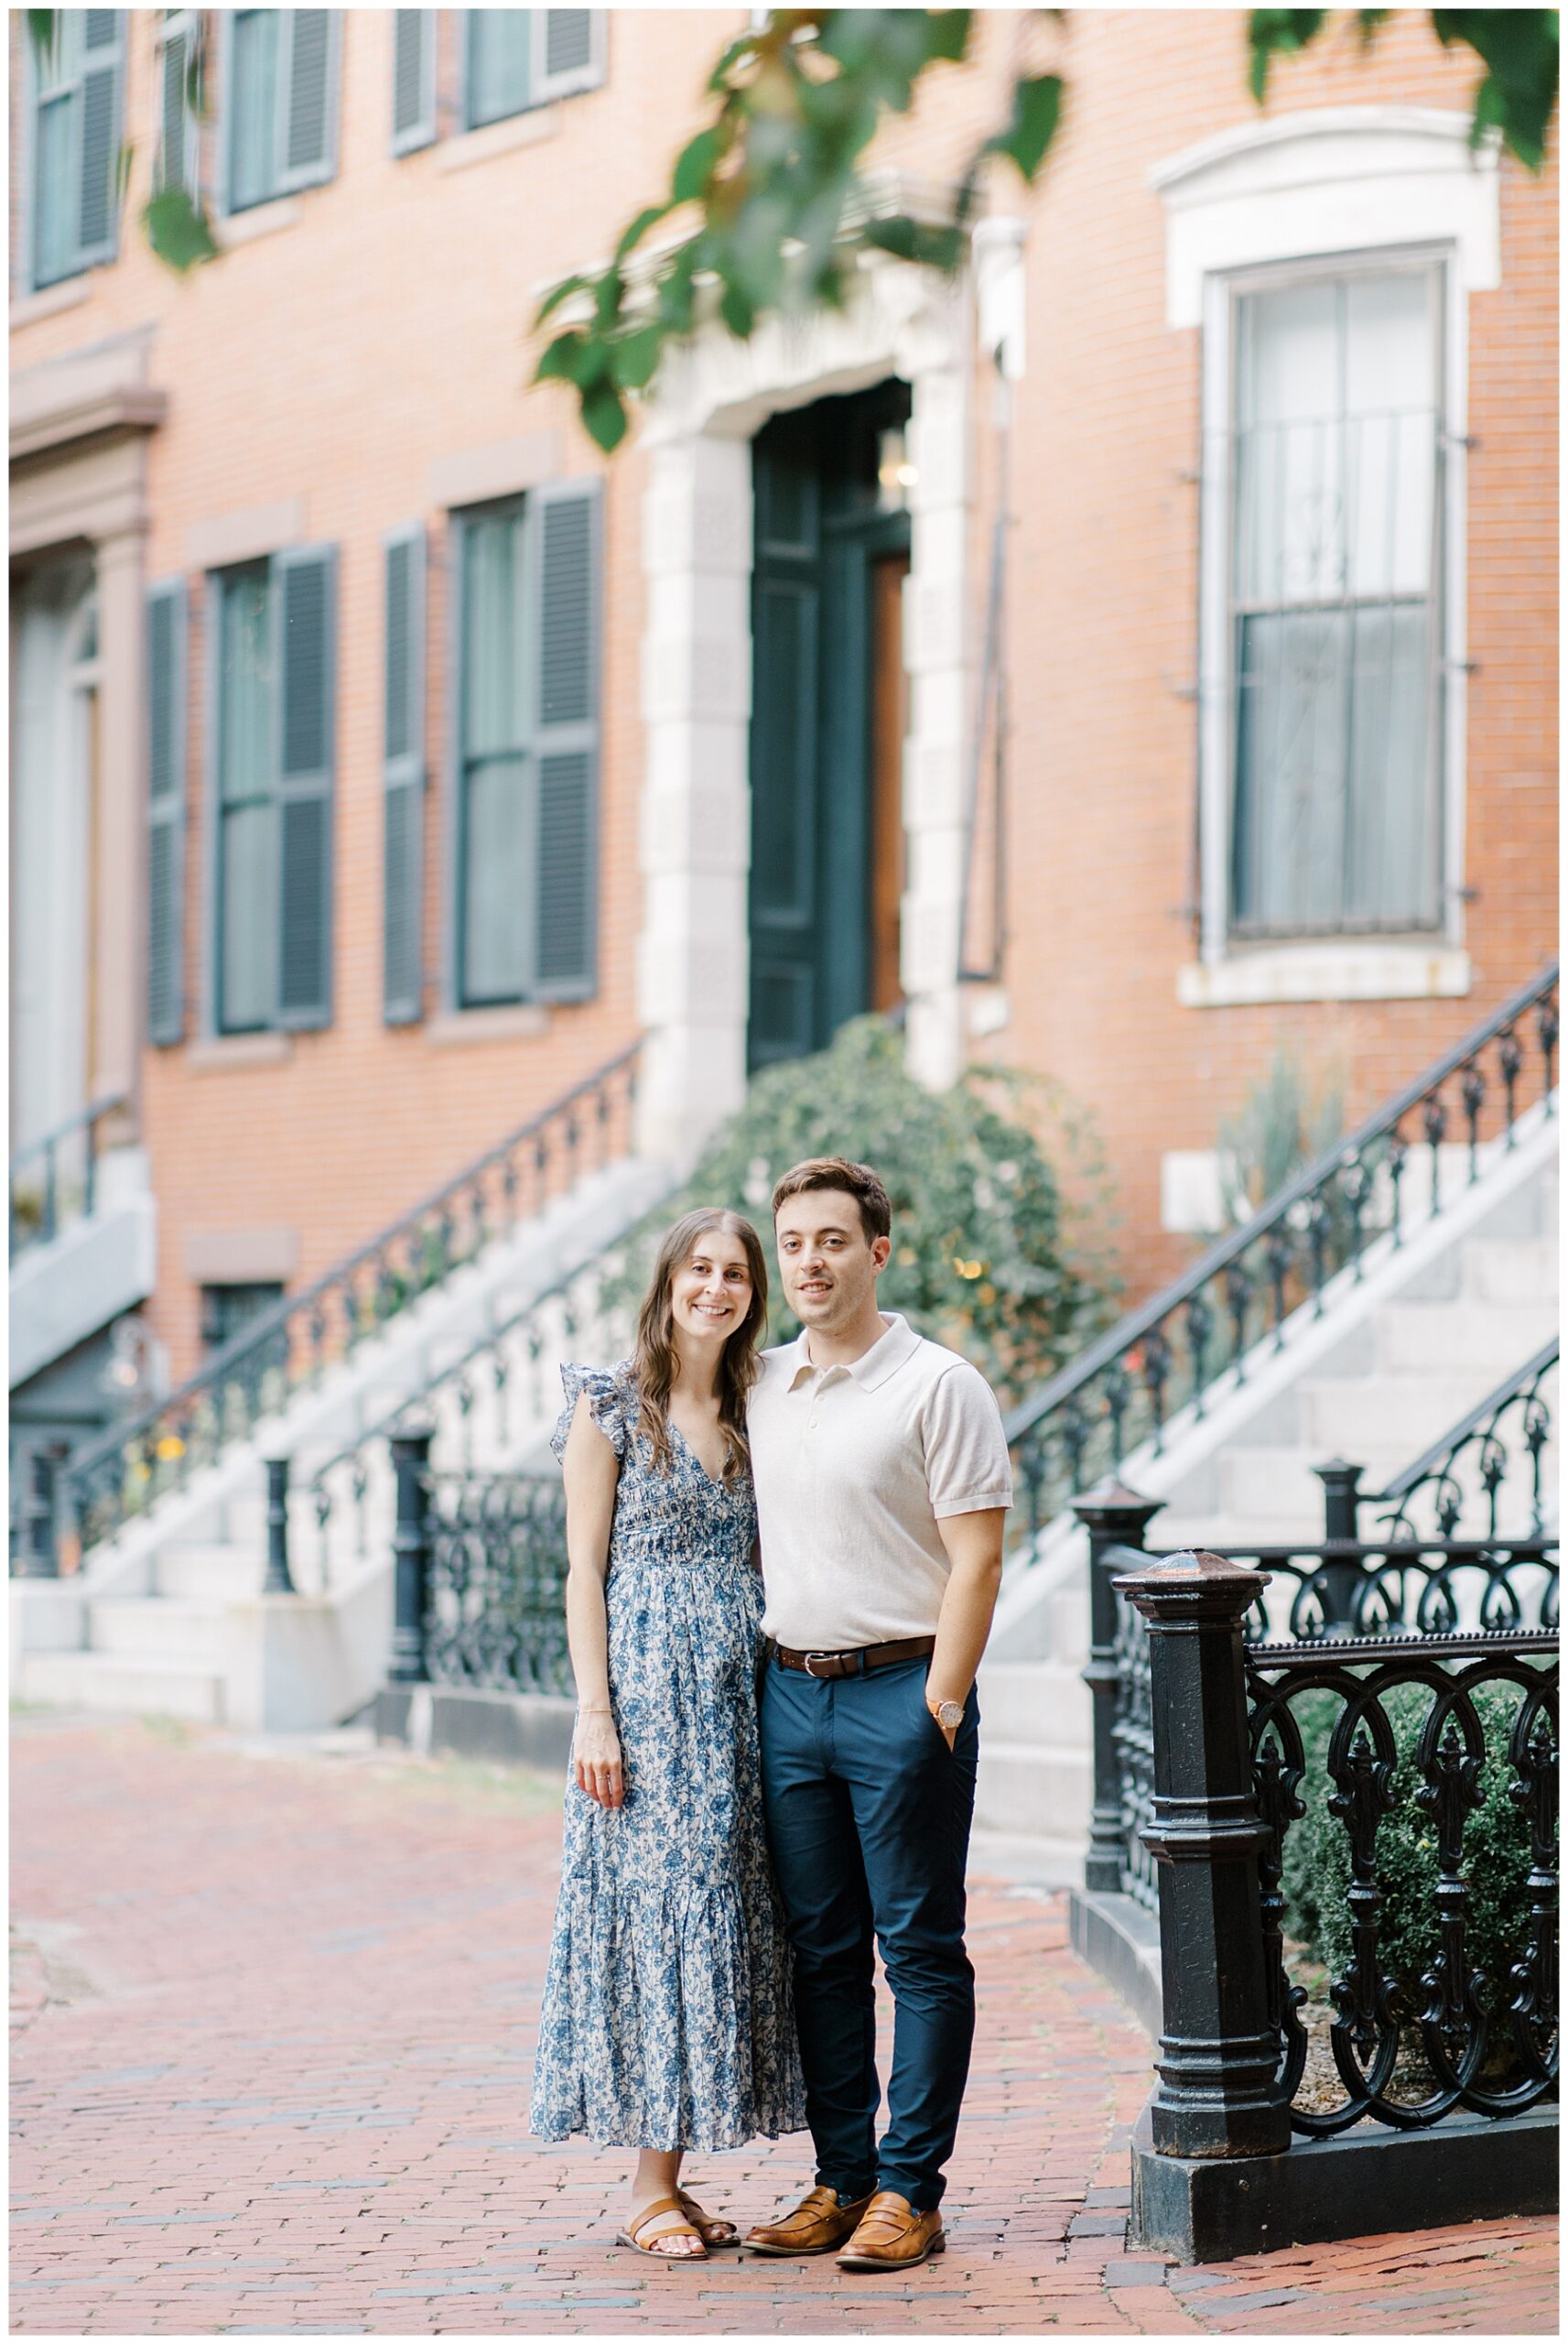 engaged couple in front of historic brownstones in Boston neighborhod